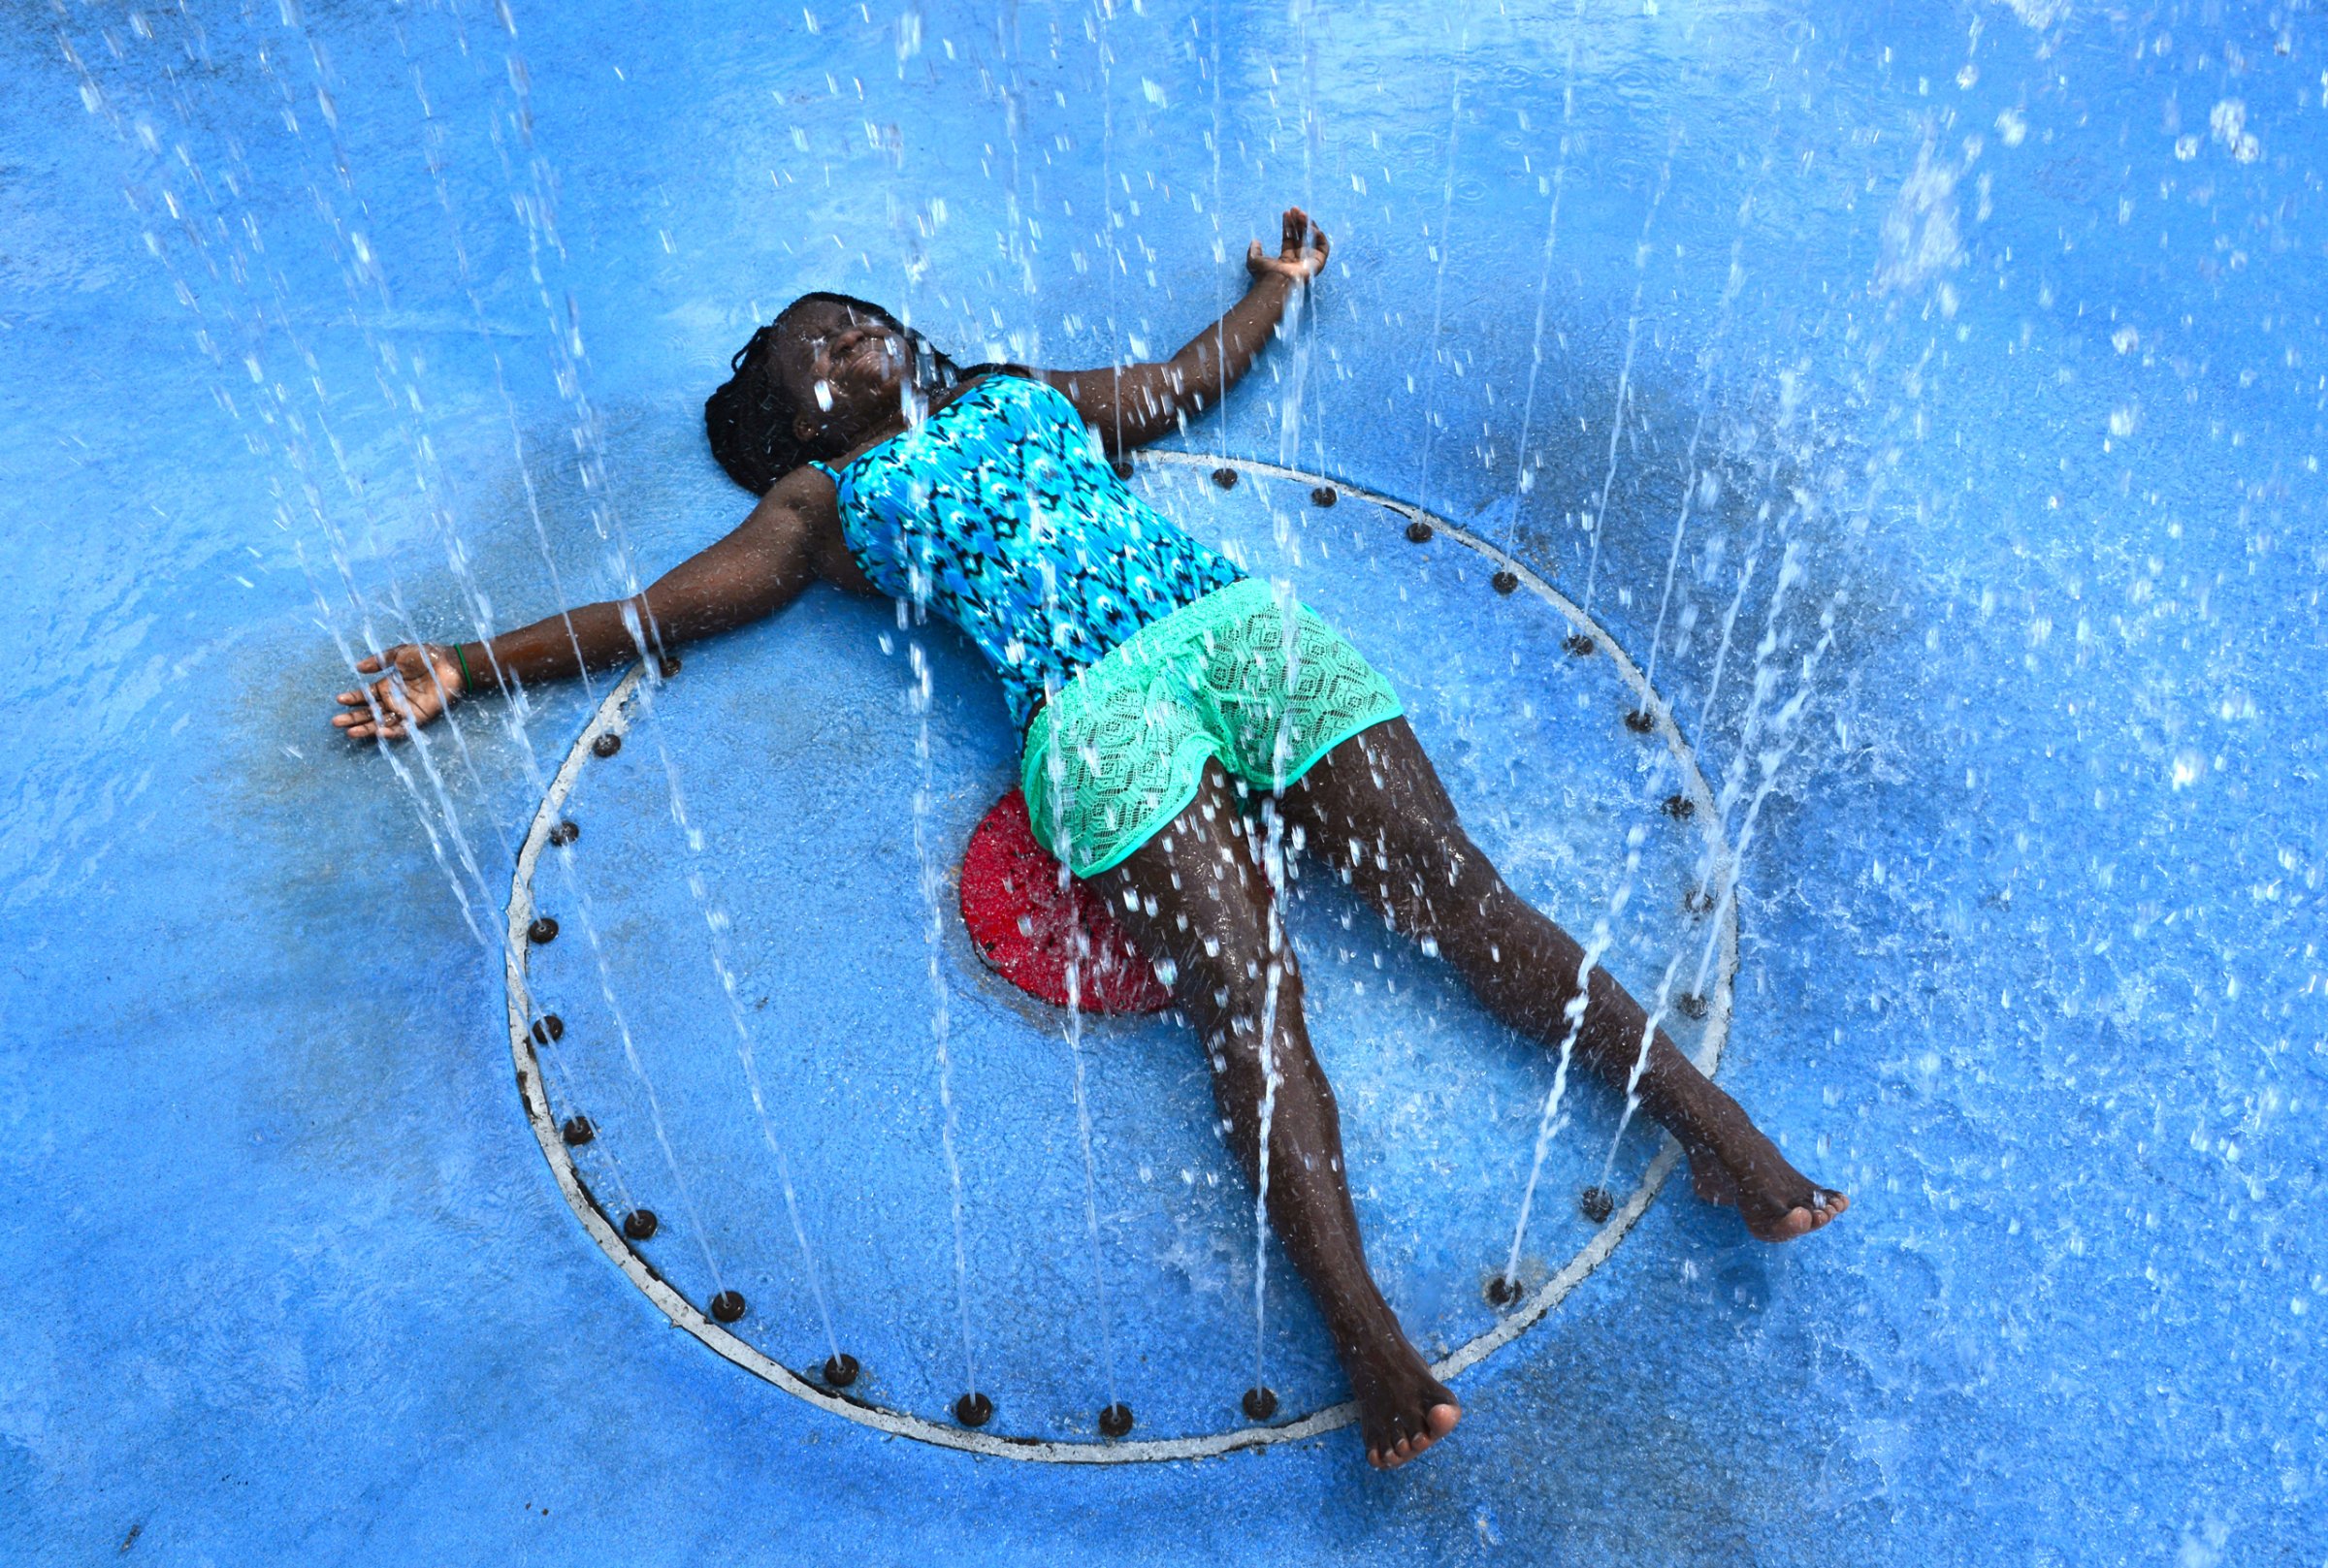 With the temperature in the mid 90's, Carliya Dove, 12, soaks up the full effects of the play fountain in Julius Guinyard Park in Jacksonville, Fla., to beat the afternoon heat on Wednesday July 20, 2016. (Bob Mack/The Florida Times-Union via AP)